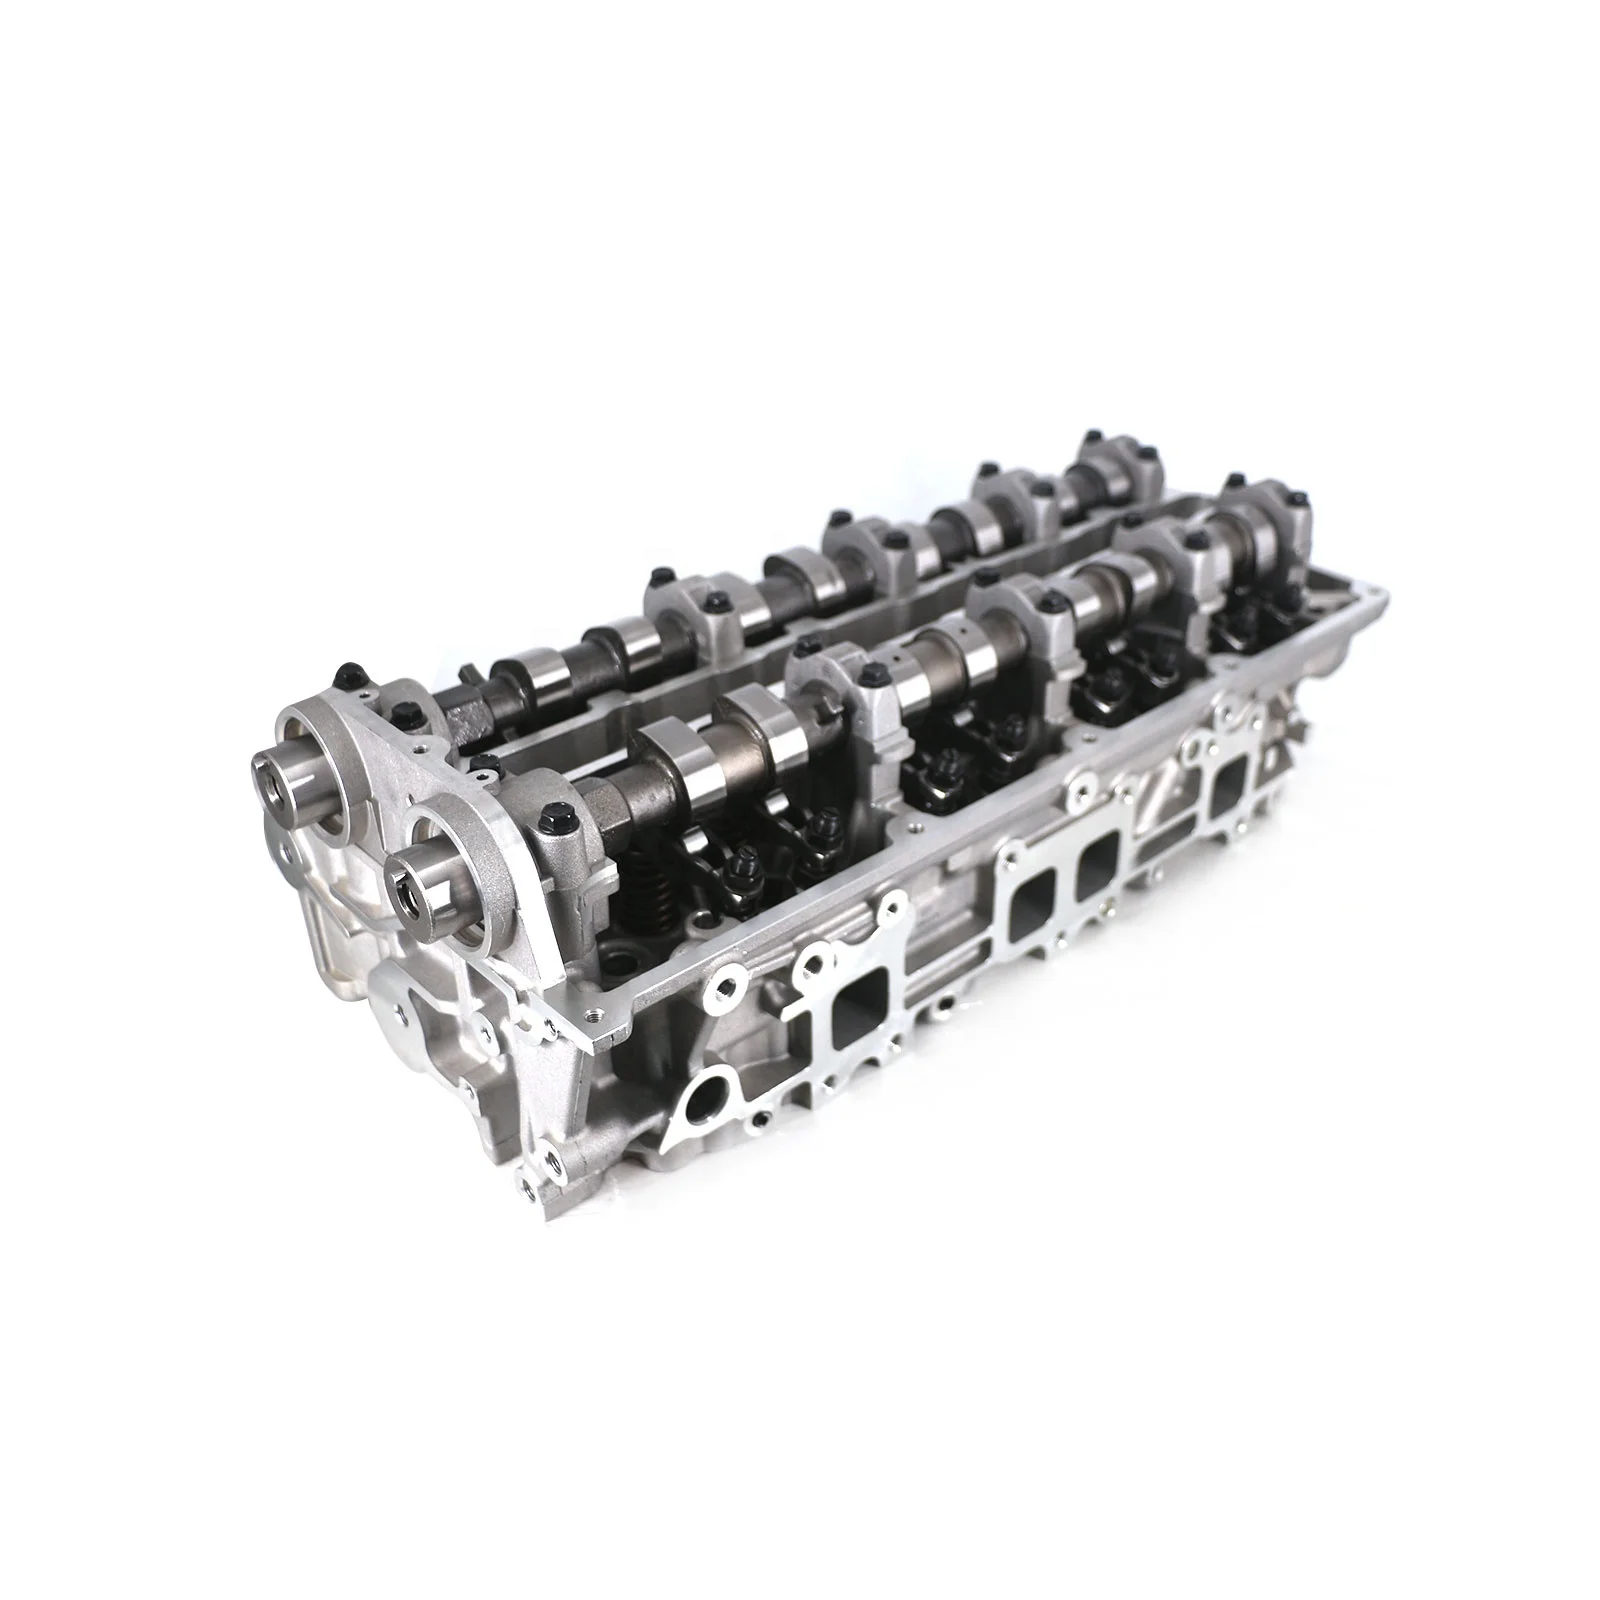 

Auto Engine Chinese Complete Cylinder Head WE WEC Car Engine for Mazda 2.7 with 16Valves and 4Cylinders